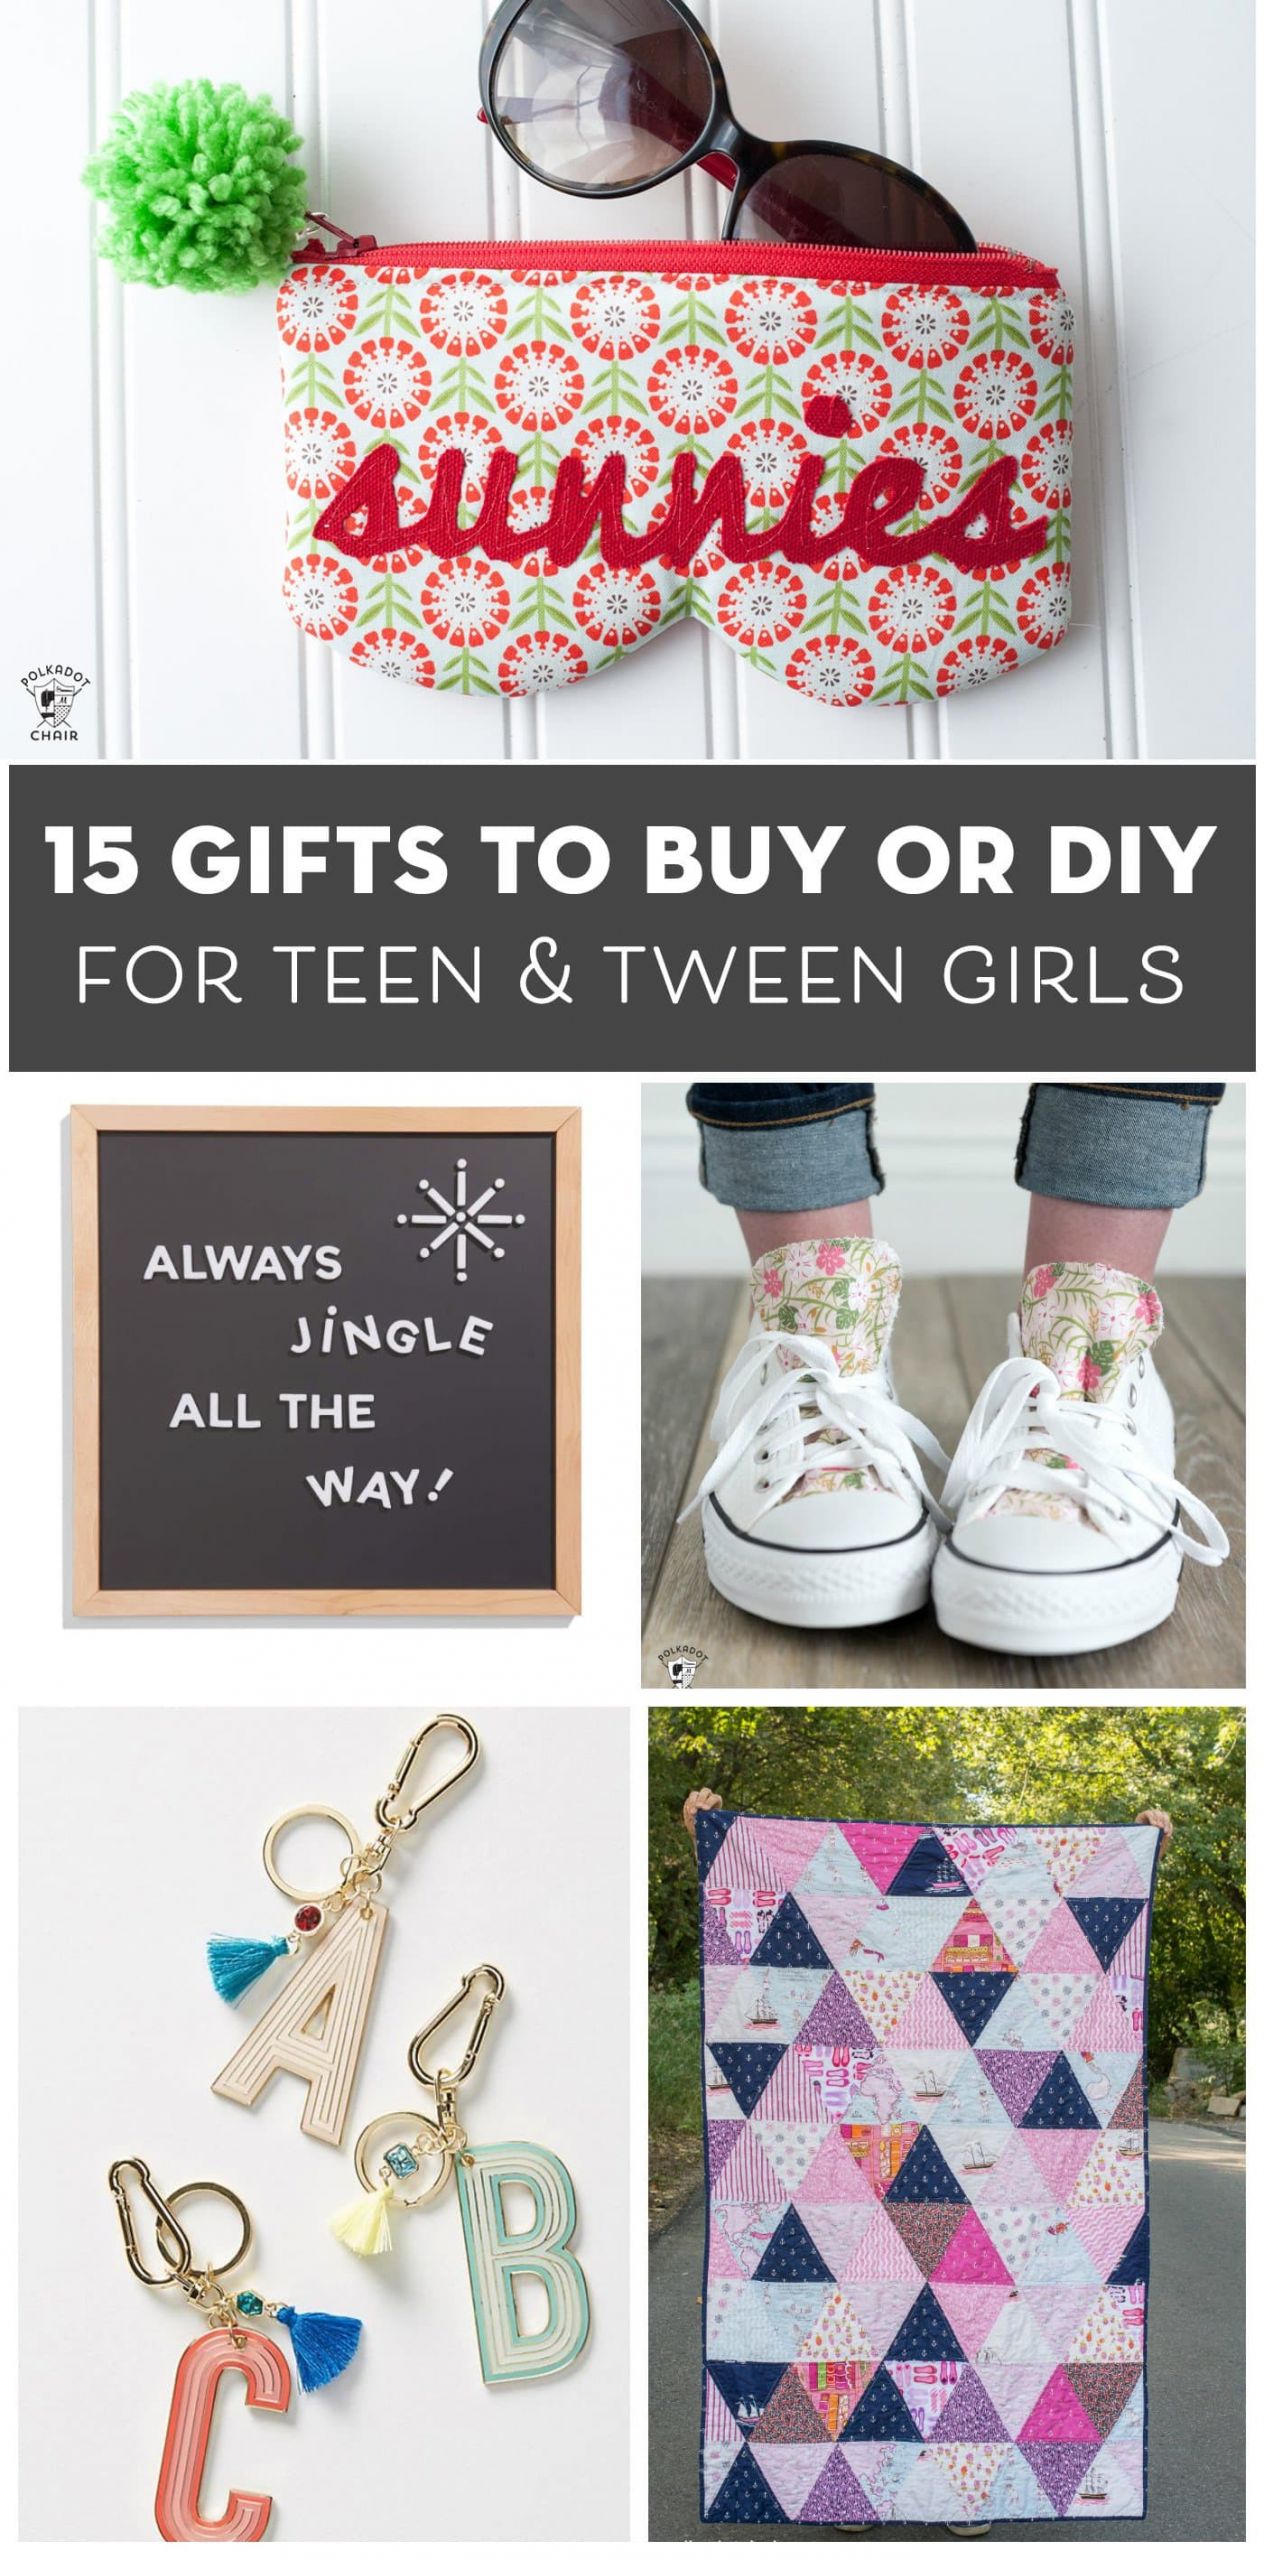 Gift Ideas For Teen Girls
 15 Gift Ideas for Teenage Girls That You Can DIY or Buy